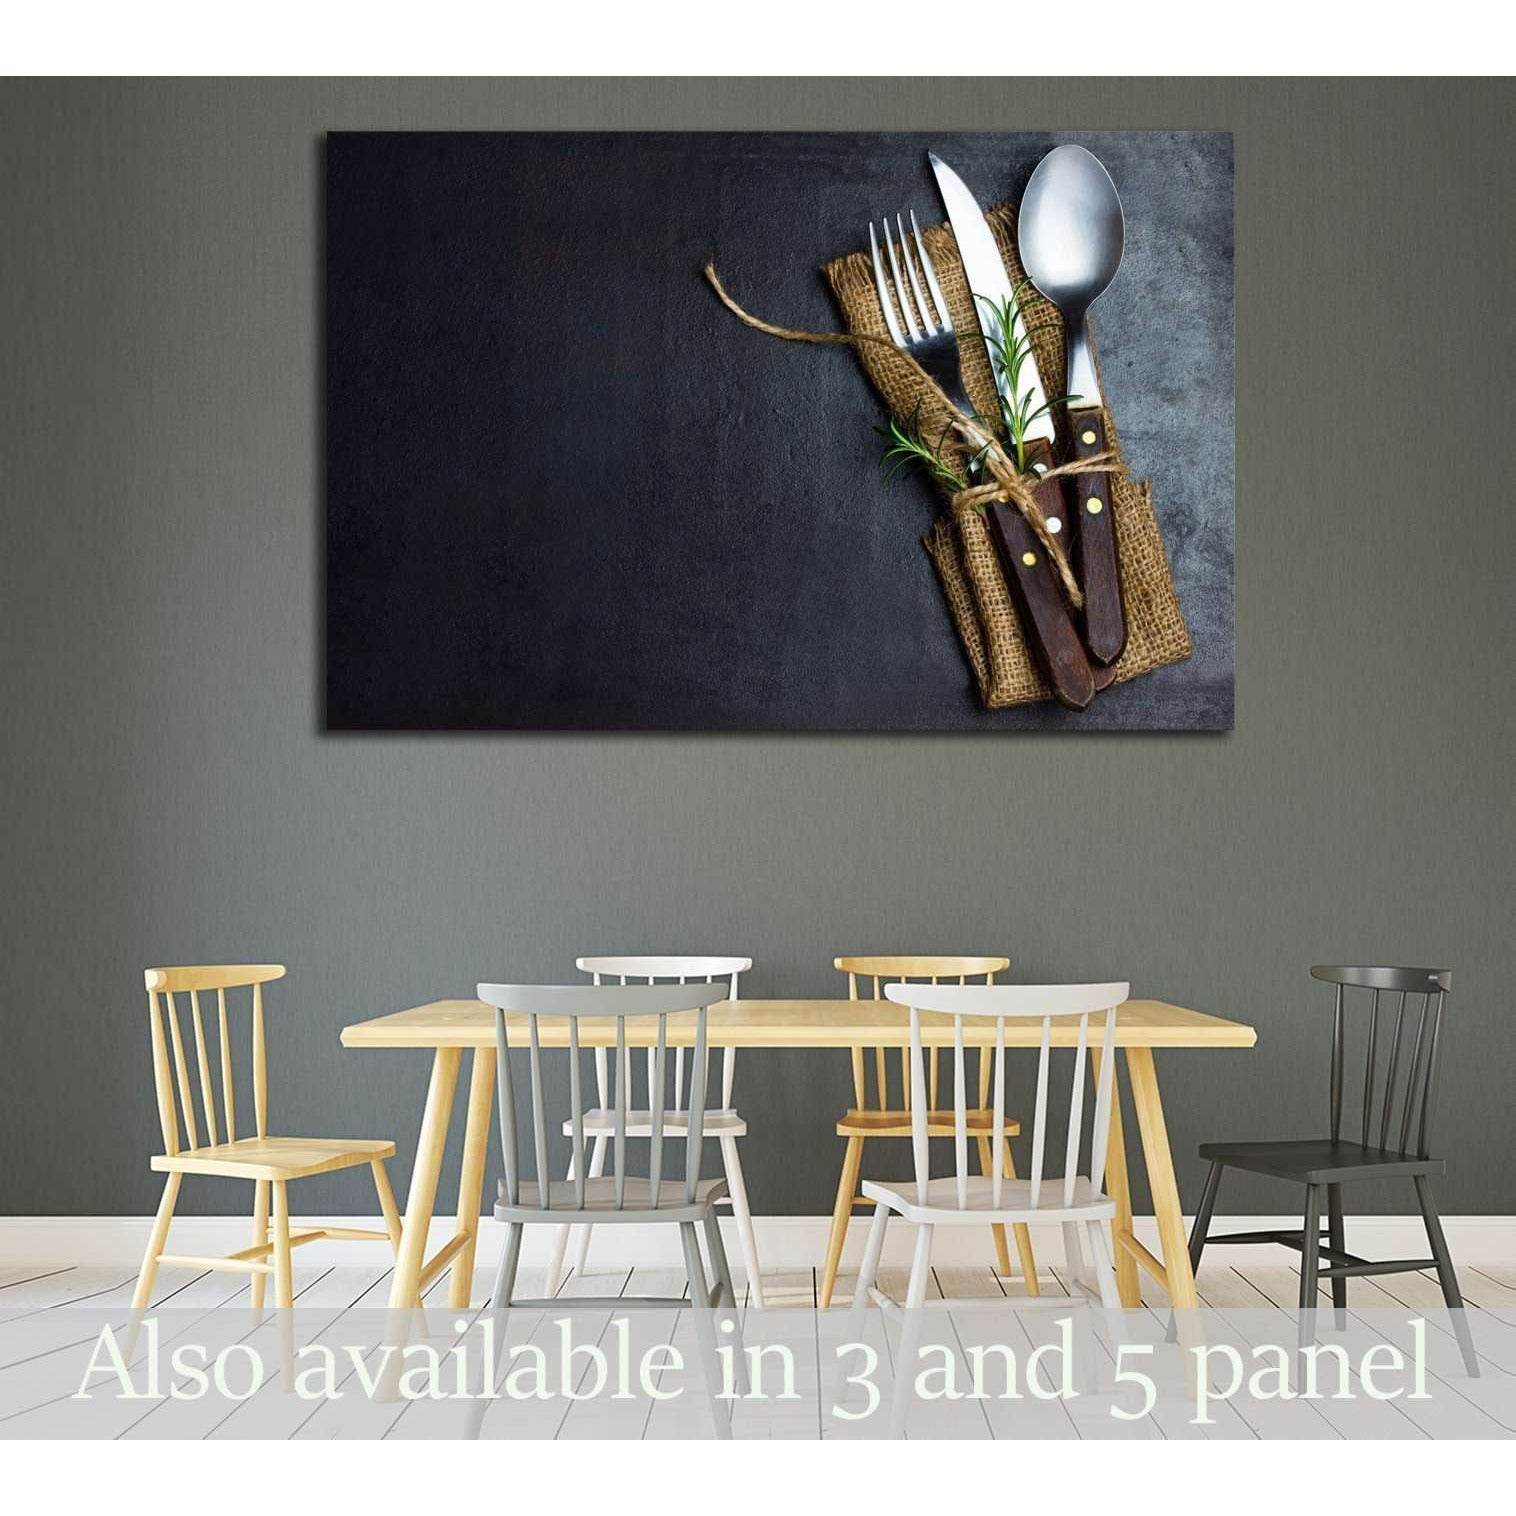 Rustic vintage set of cutlery knife, spoon, fork №1921 Ready to Hang Canvas Print